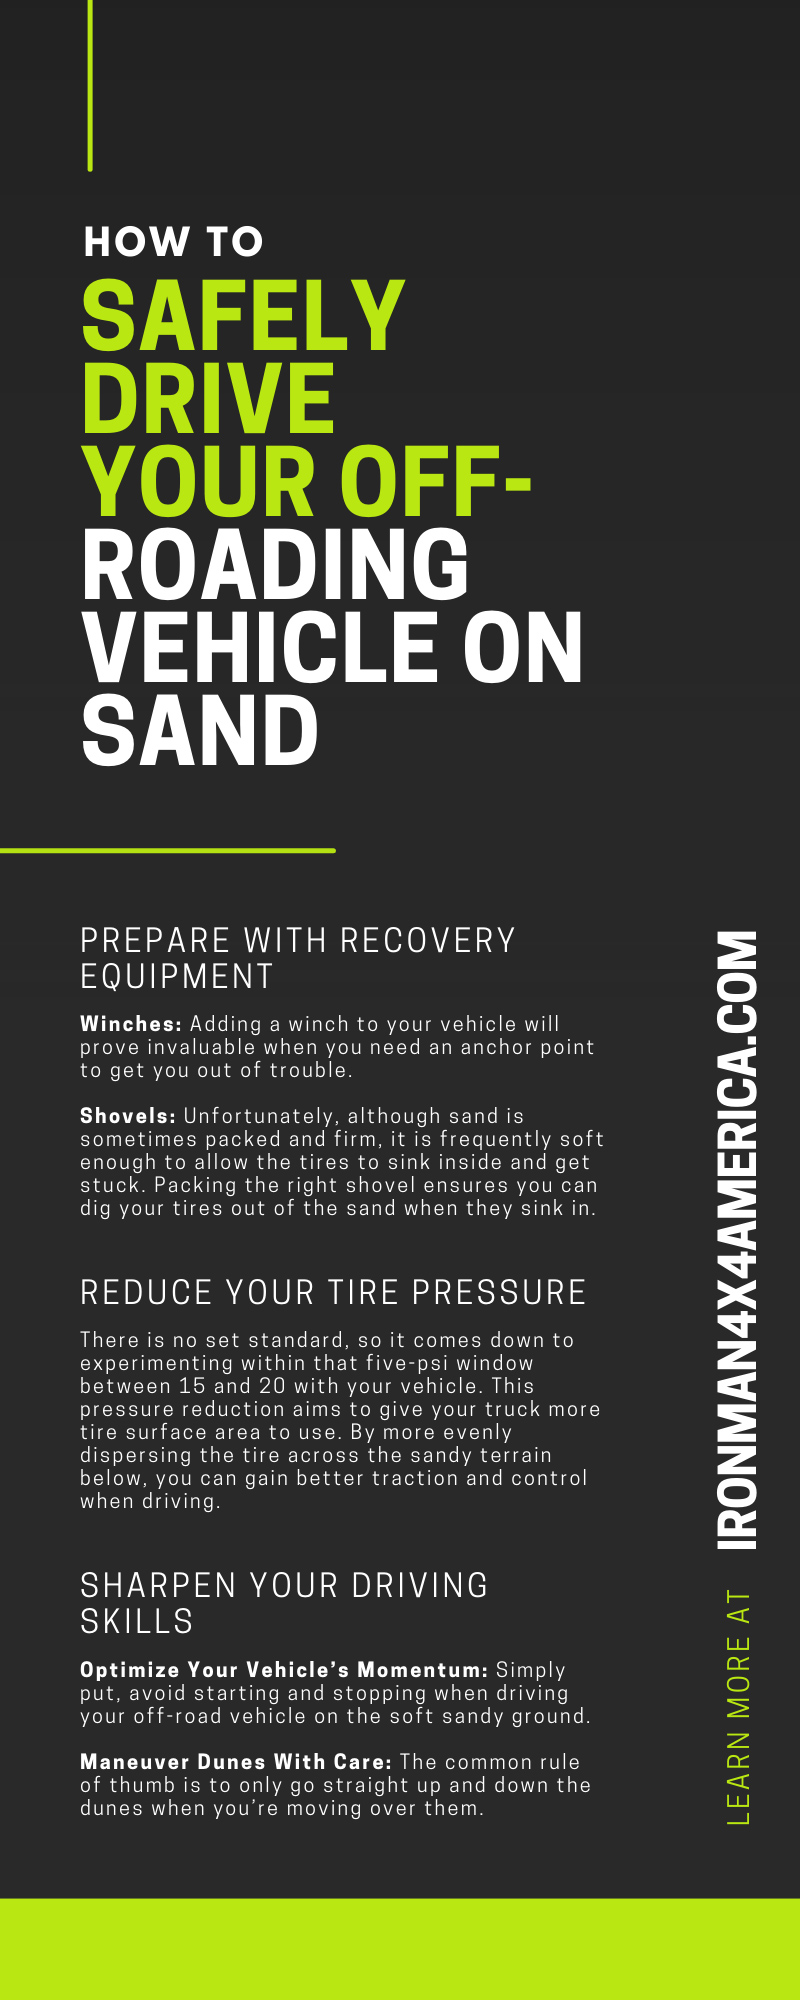 How To Safely Drive Your Off-Roading Vehicle on Sand